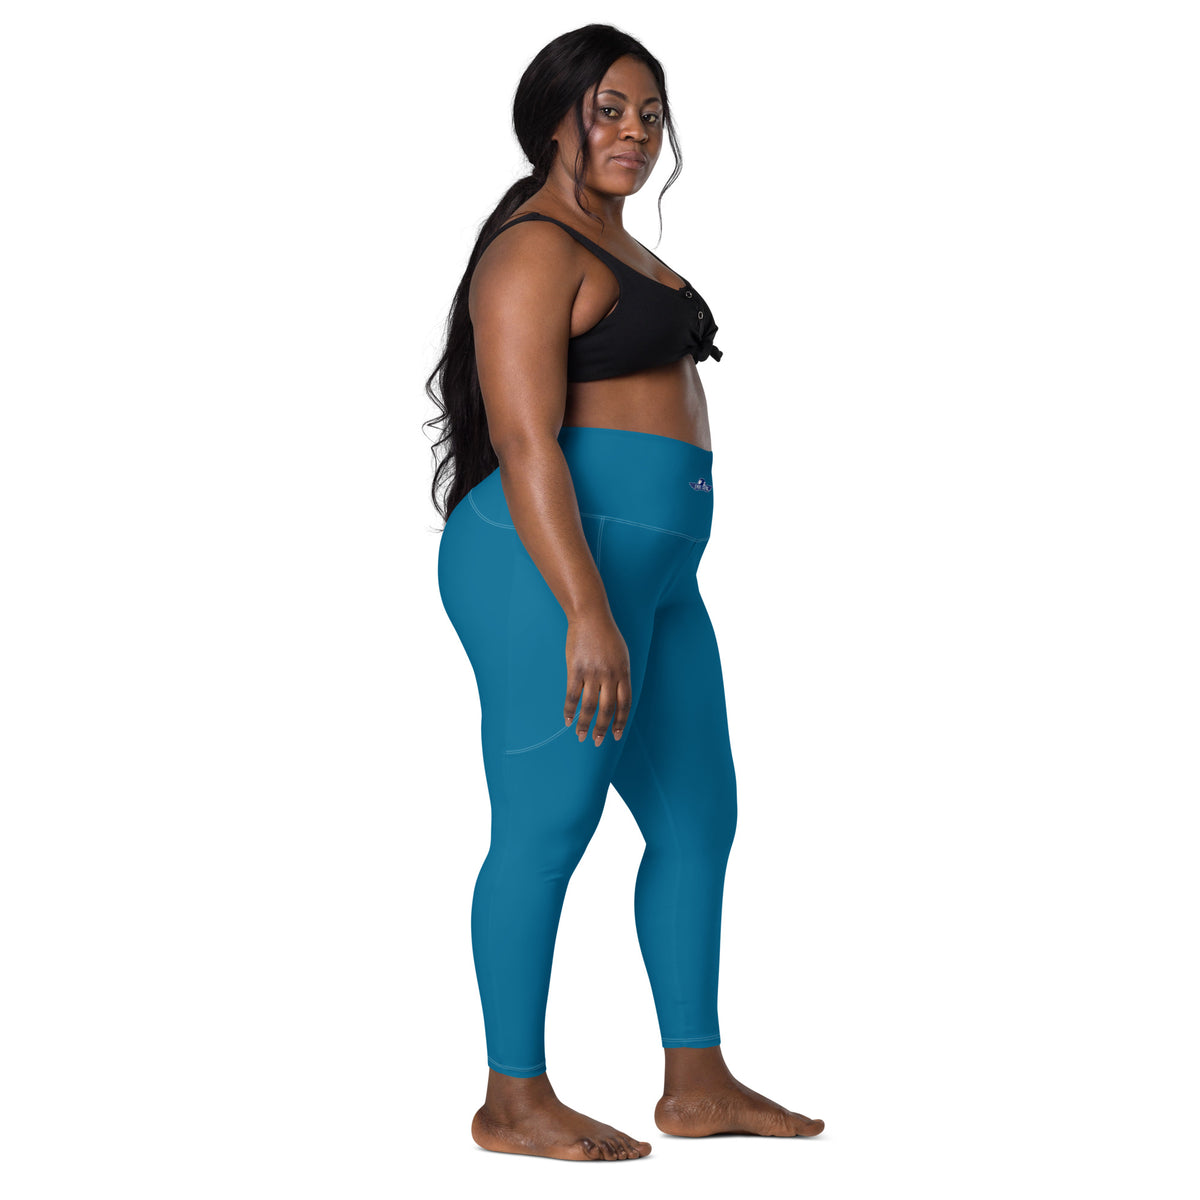 Cerulean Blue Leggings with Pockets